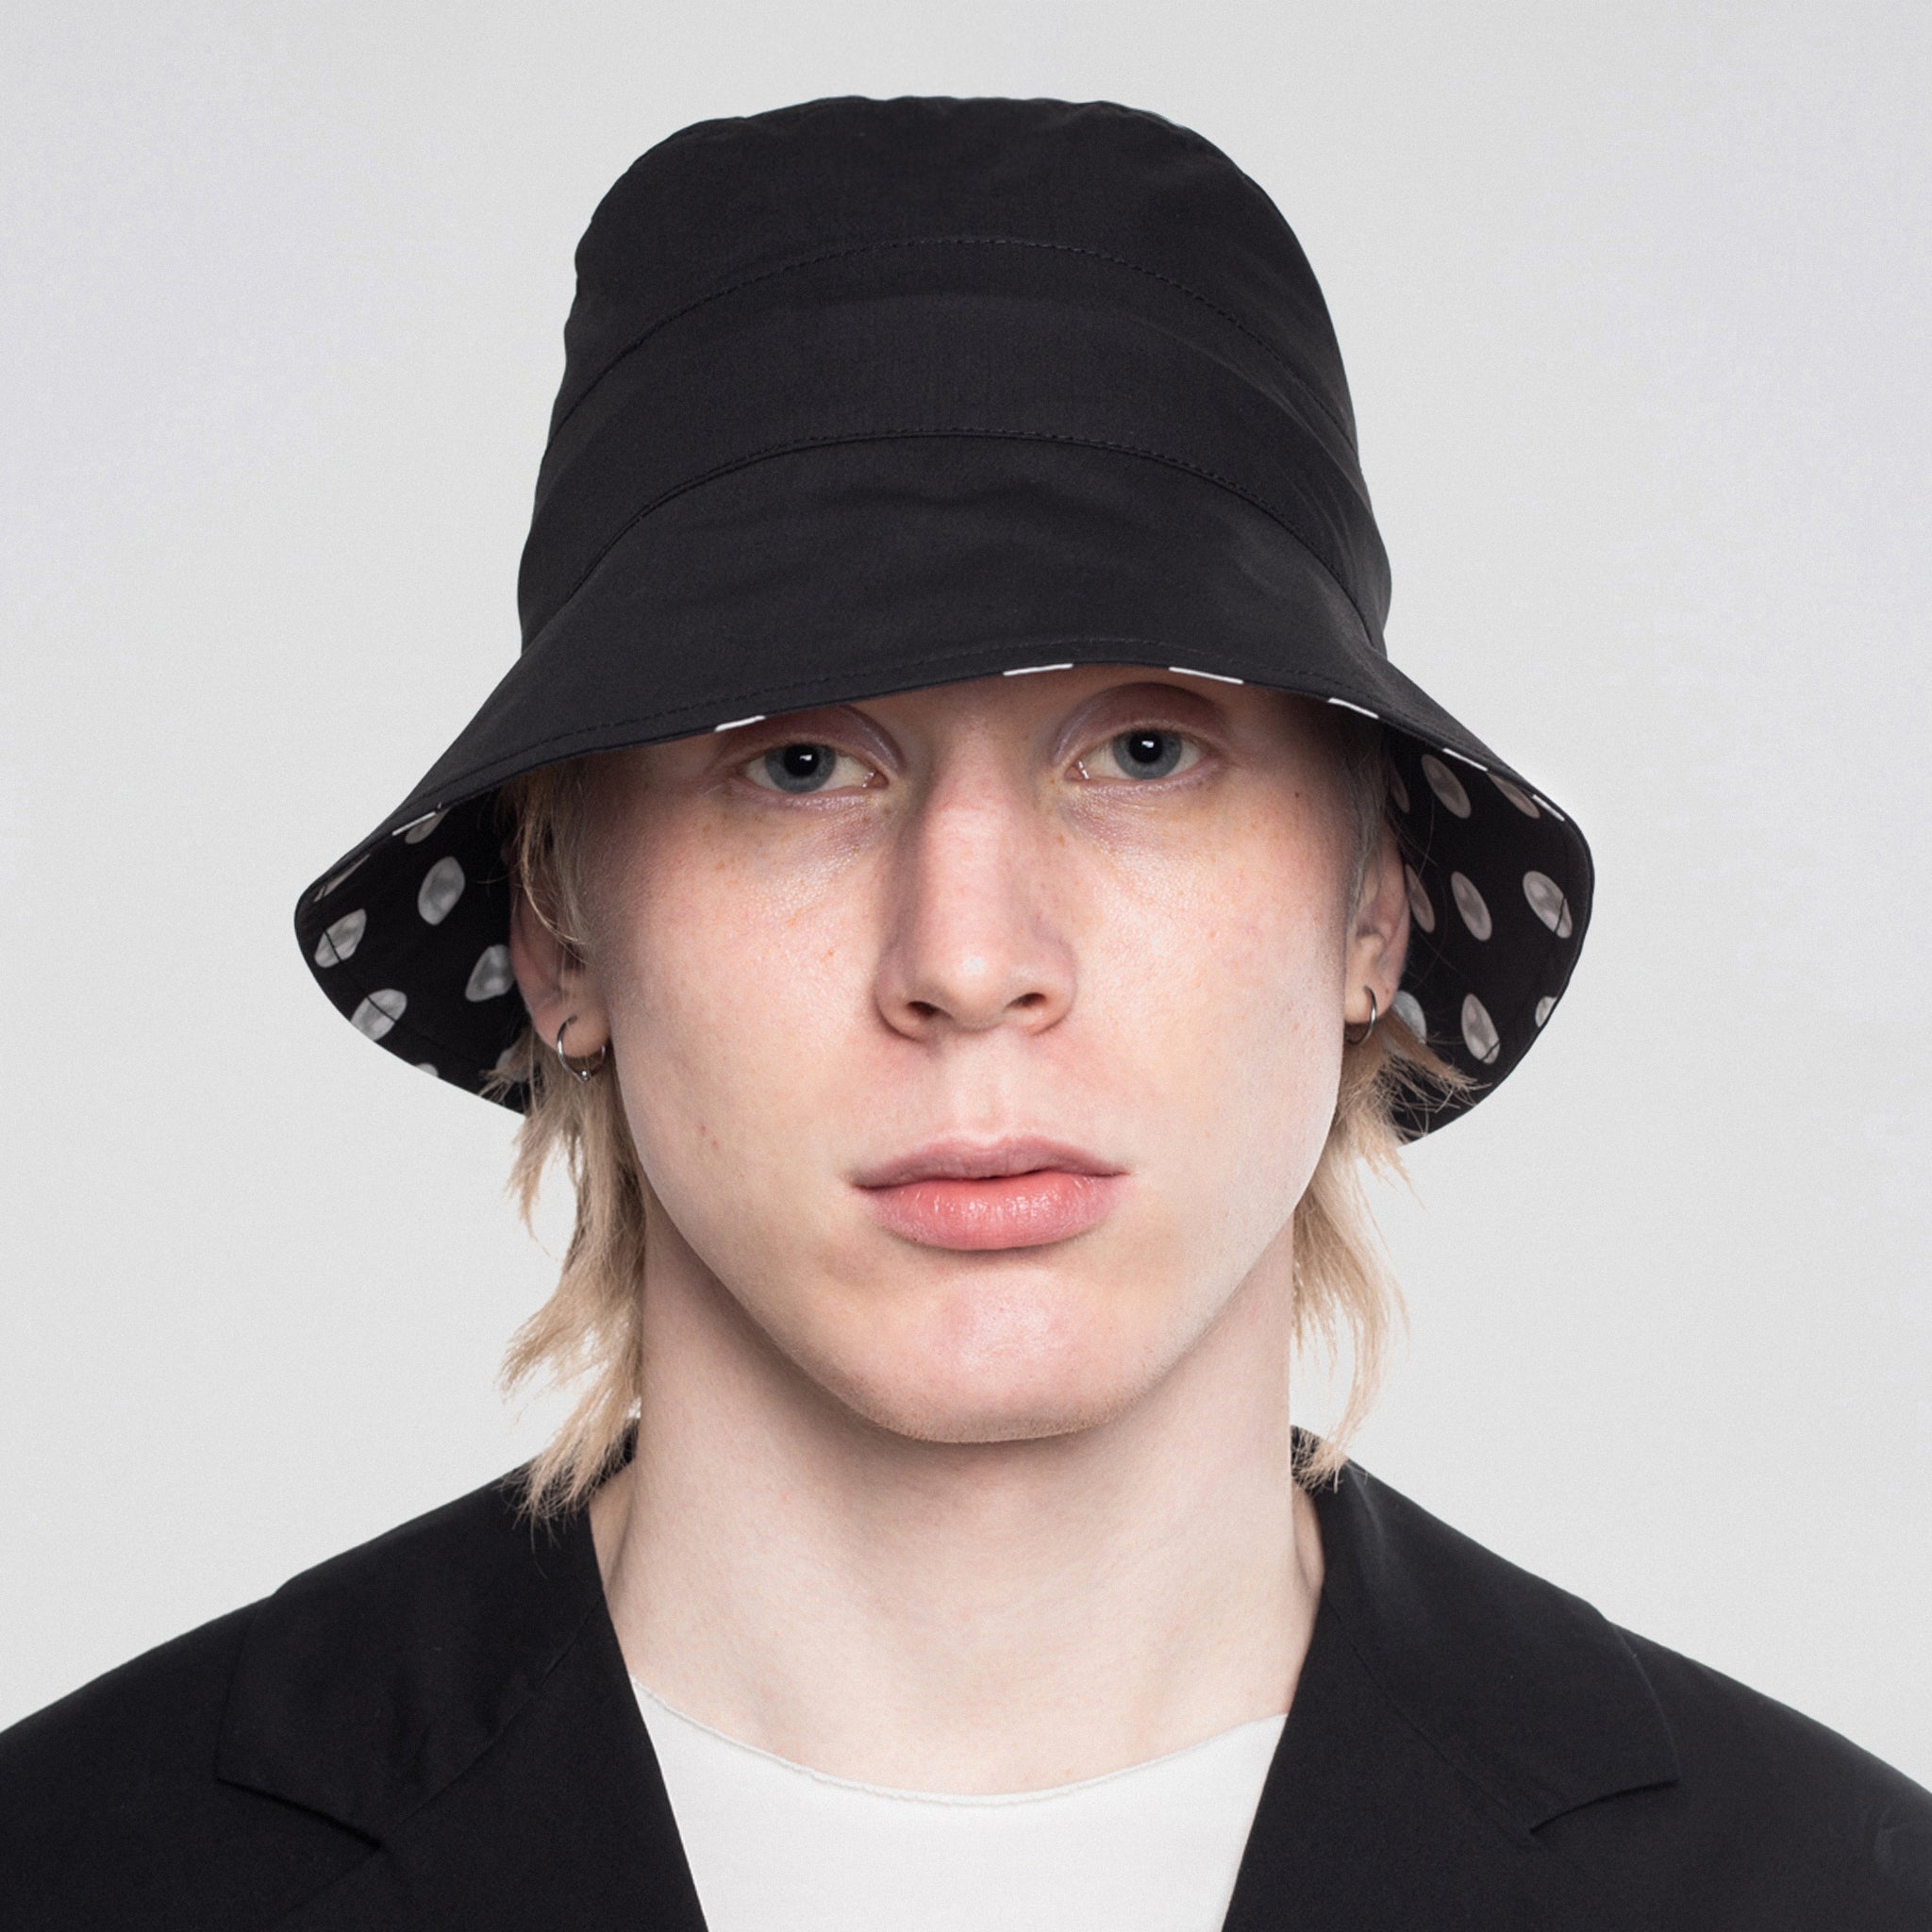 BUCKET HAT WITH DRAWSTRINGS — BLACK AND PEARLS PRINT